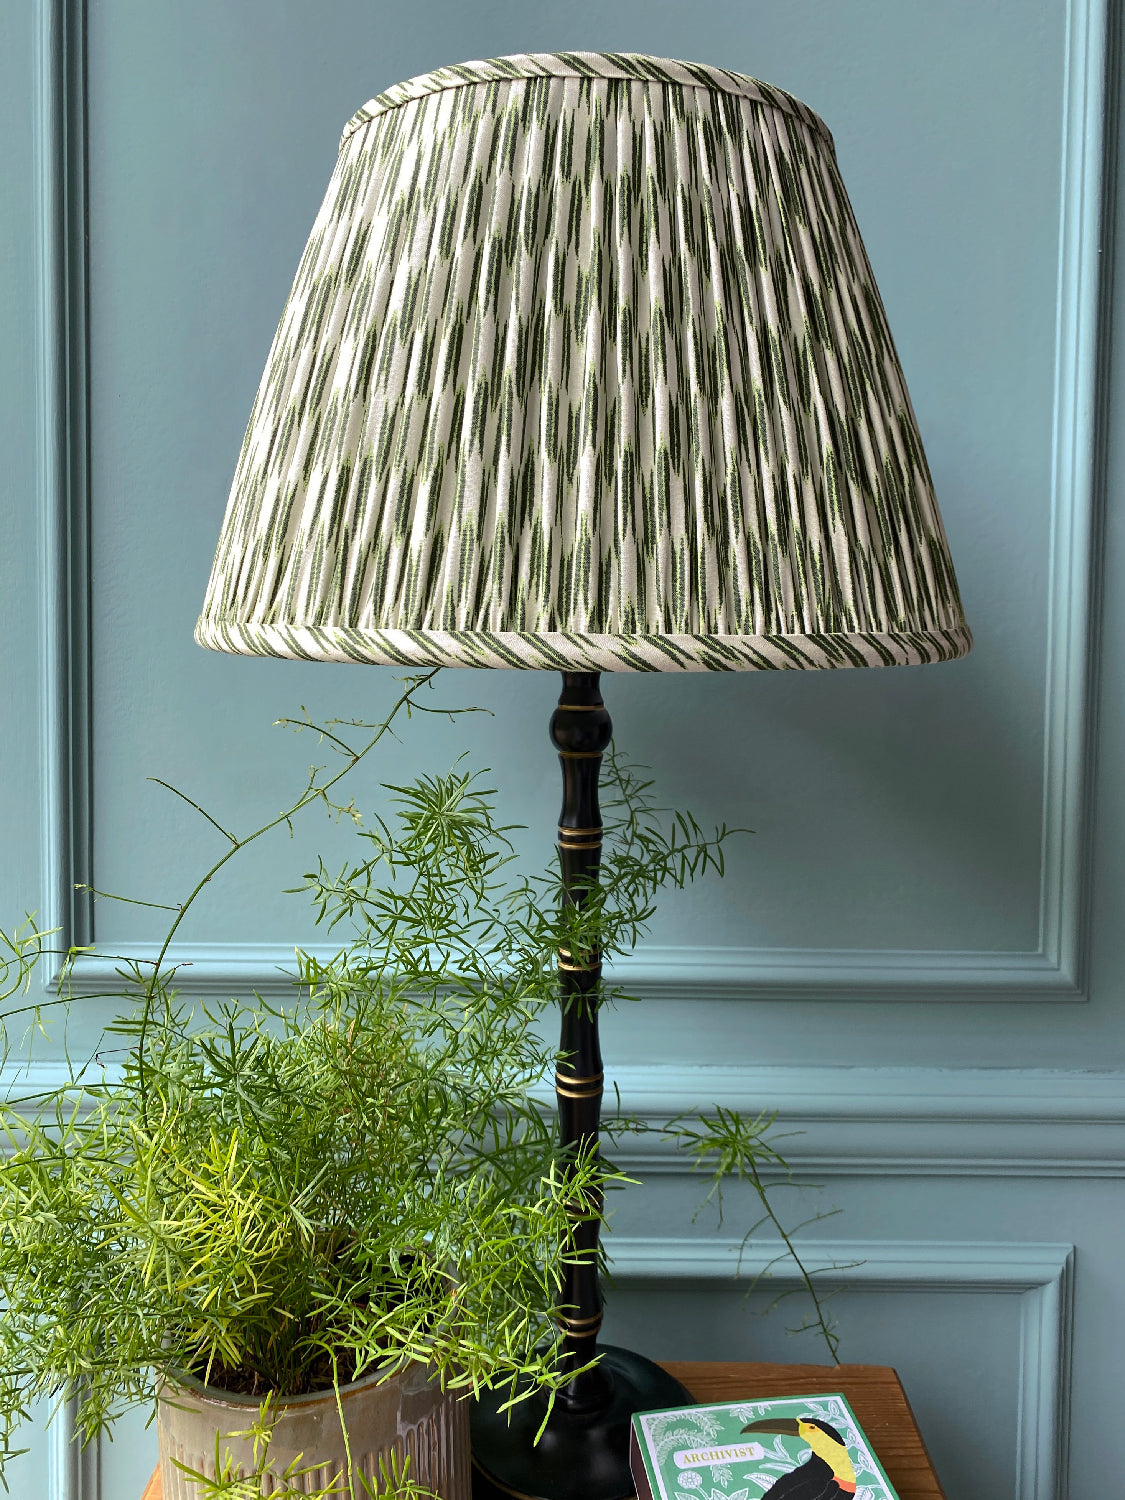 Green and white lampshade on black lamp